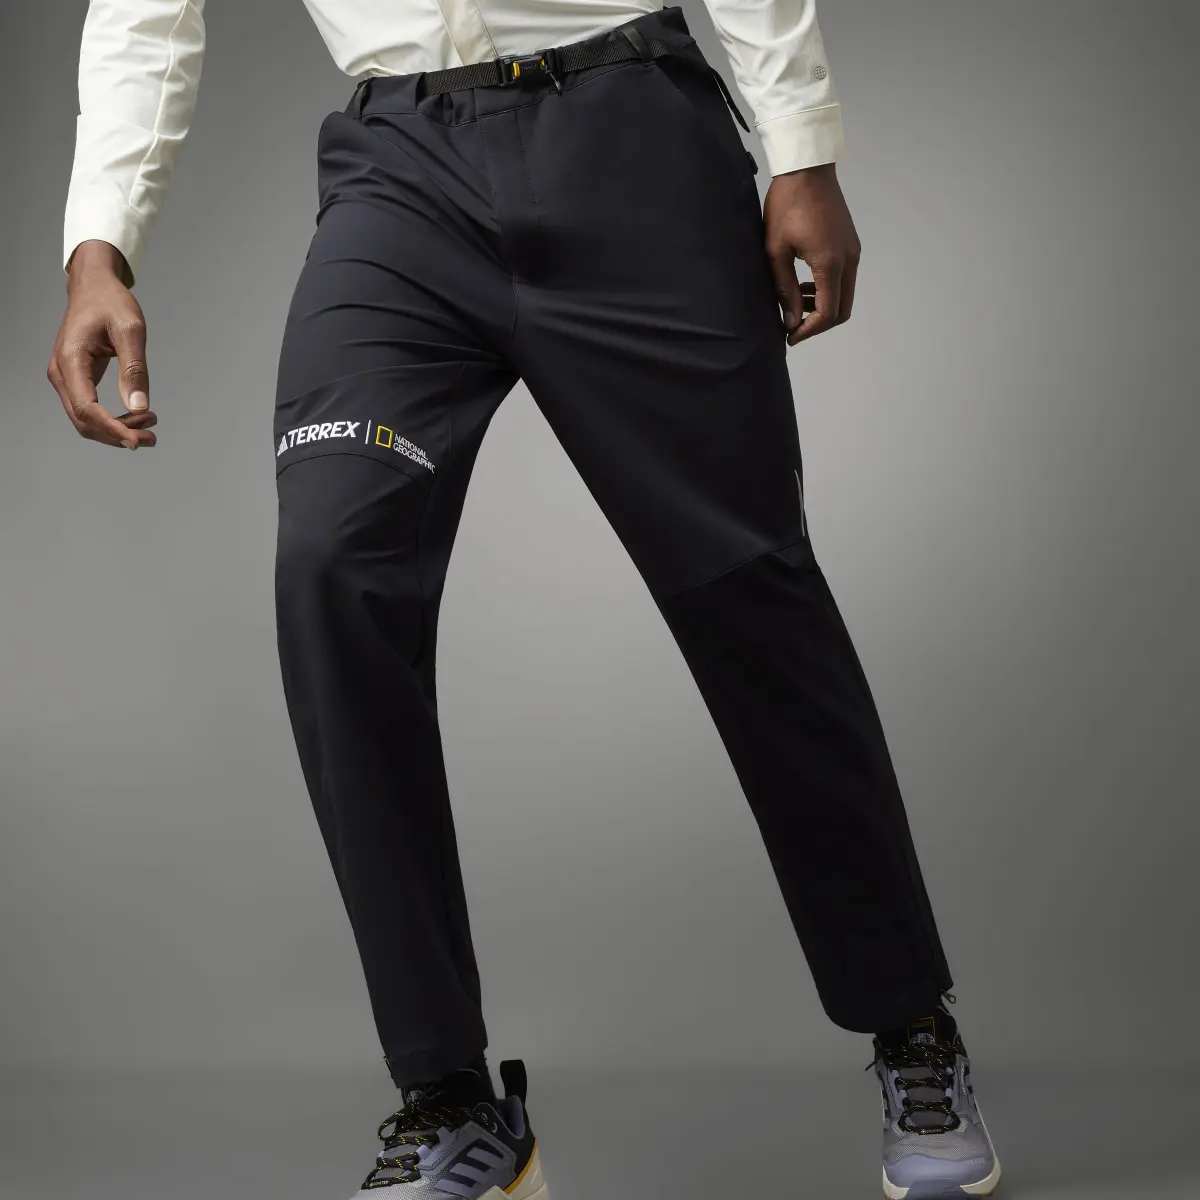 Adidas National Geographic Trousers. 3